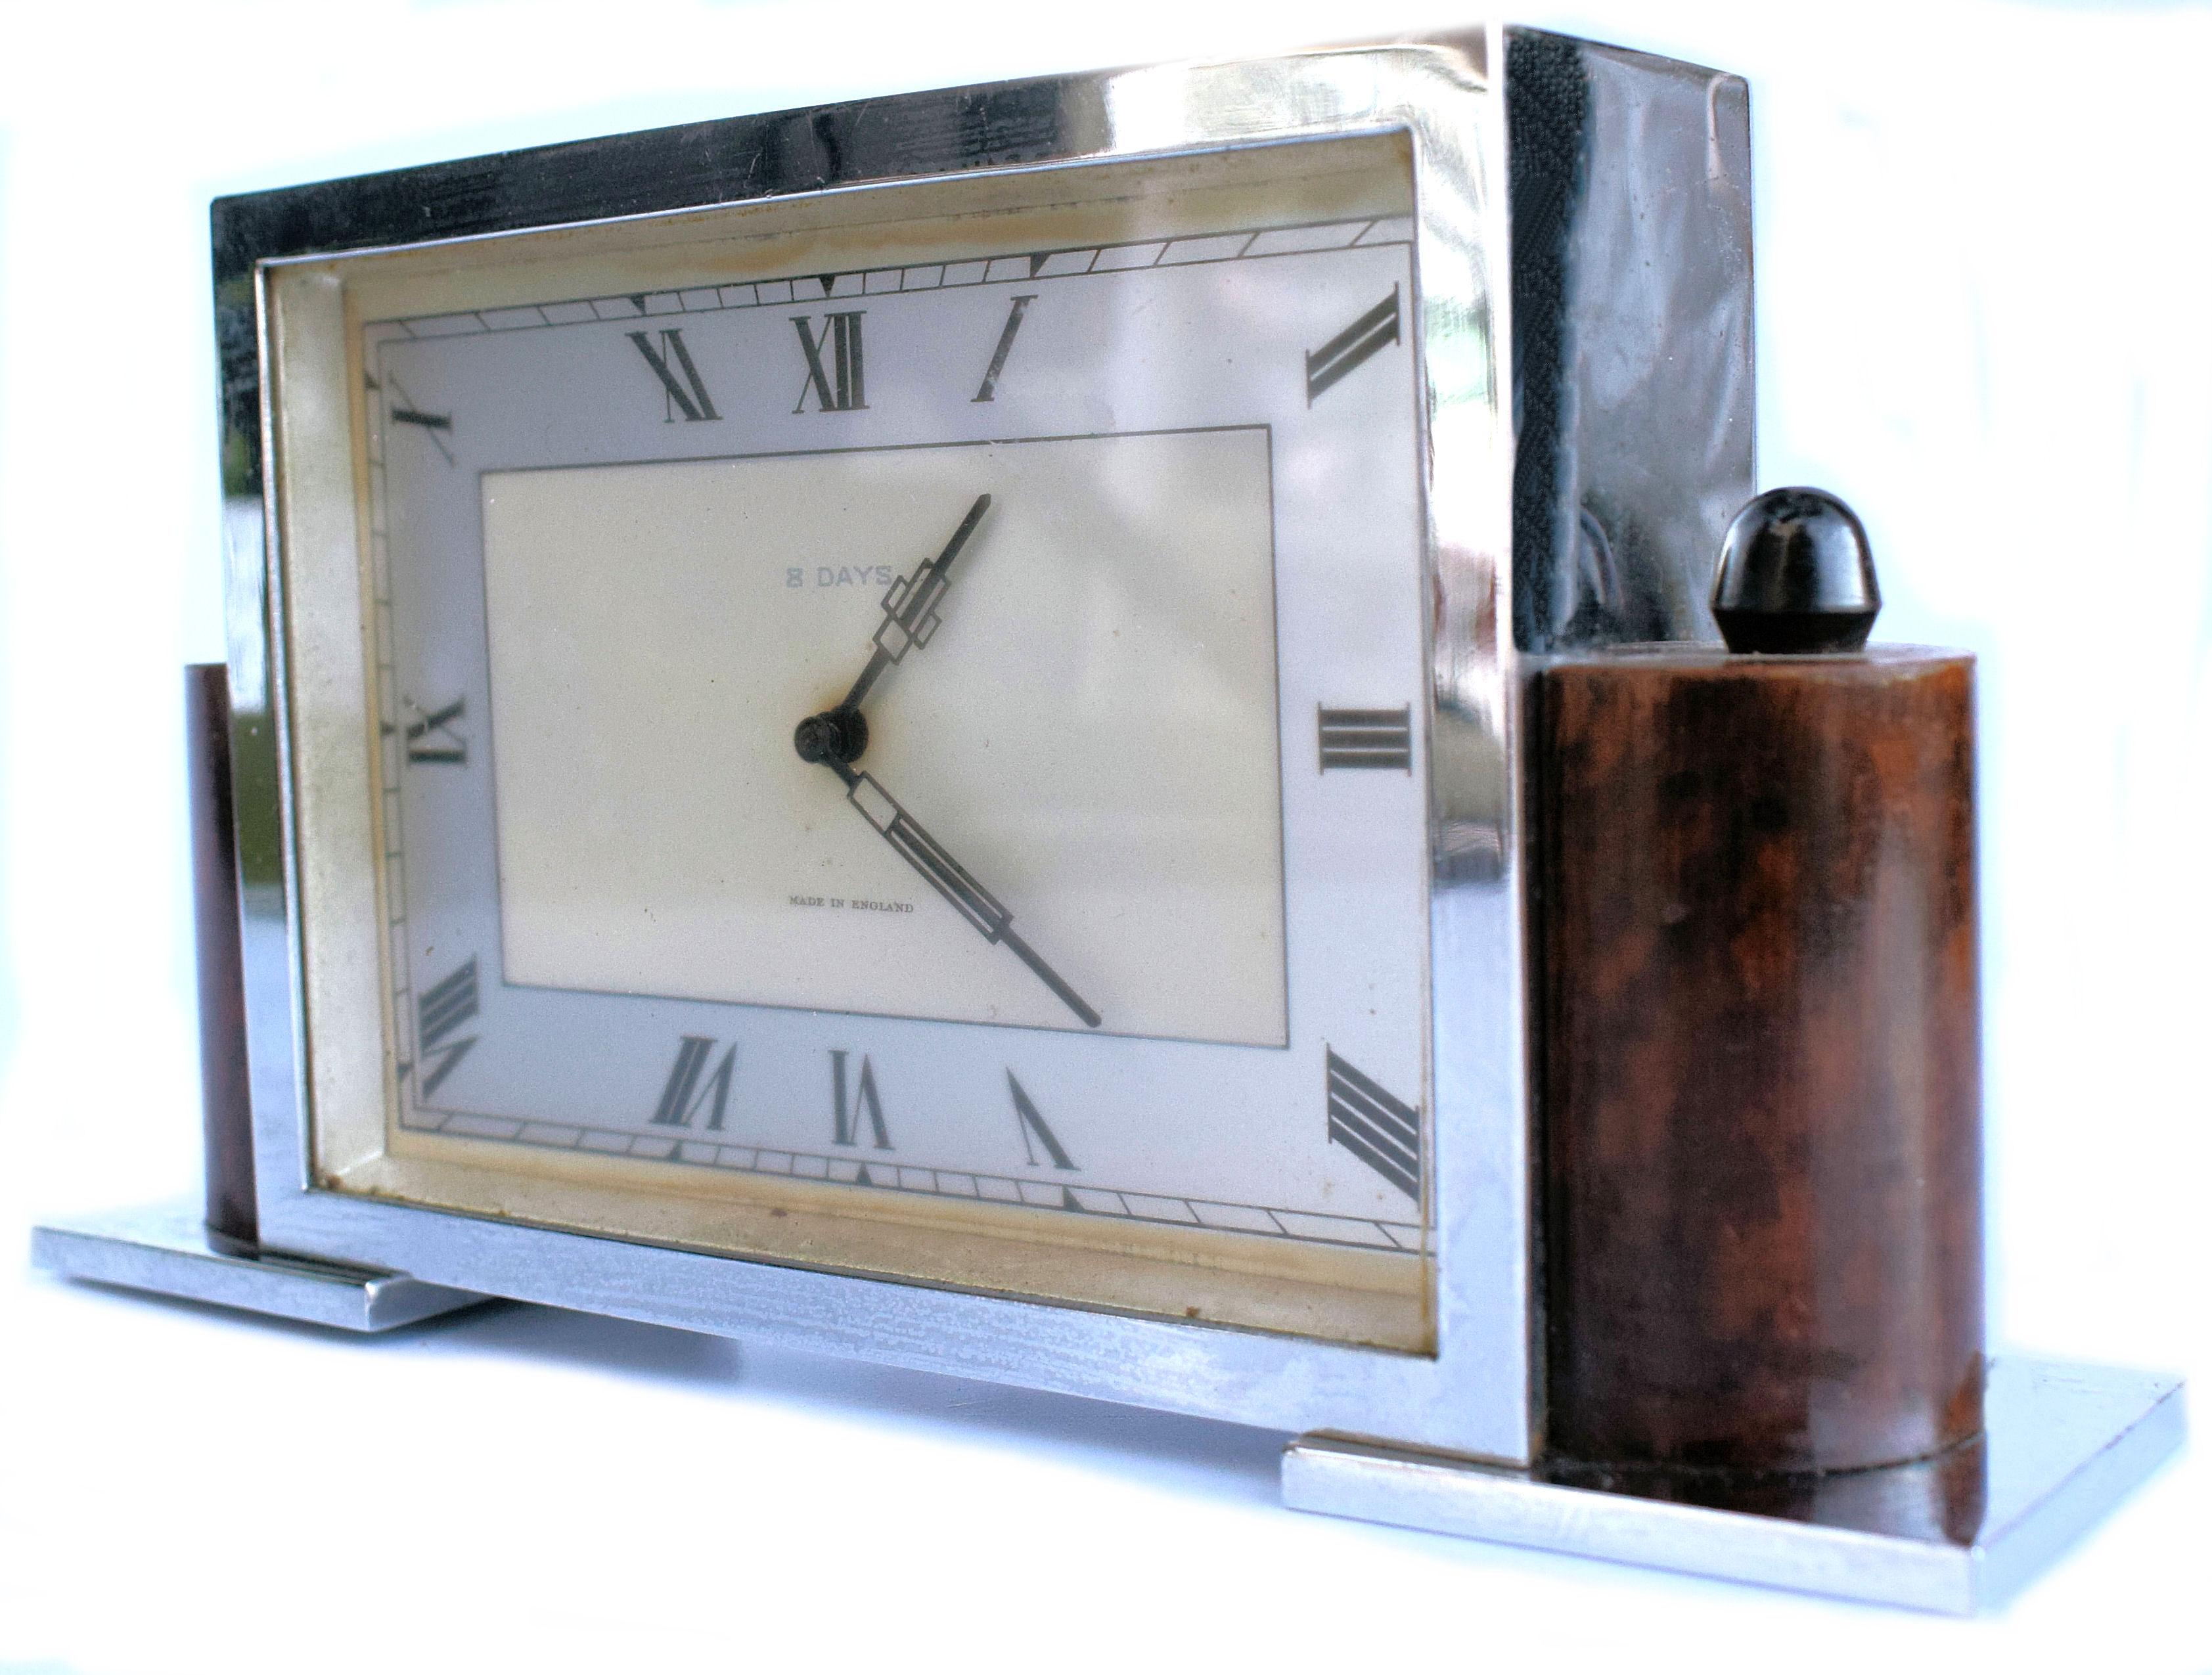 For your consideration is this stylish 1930s Art Deco clock. Quite slender in depth and overall nice size for either mantel or desk. The eight day movement has been fully serviced and so comes to you in good working order and keeping good time,